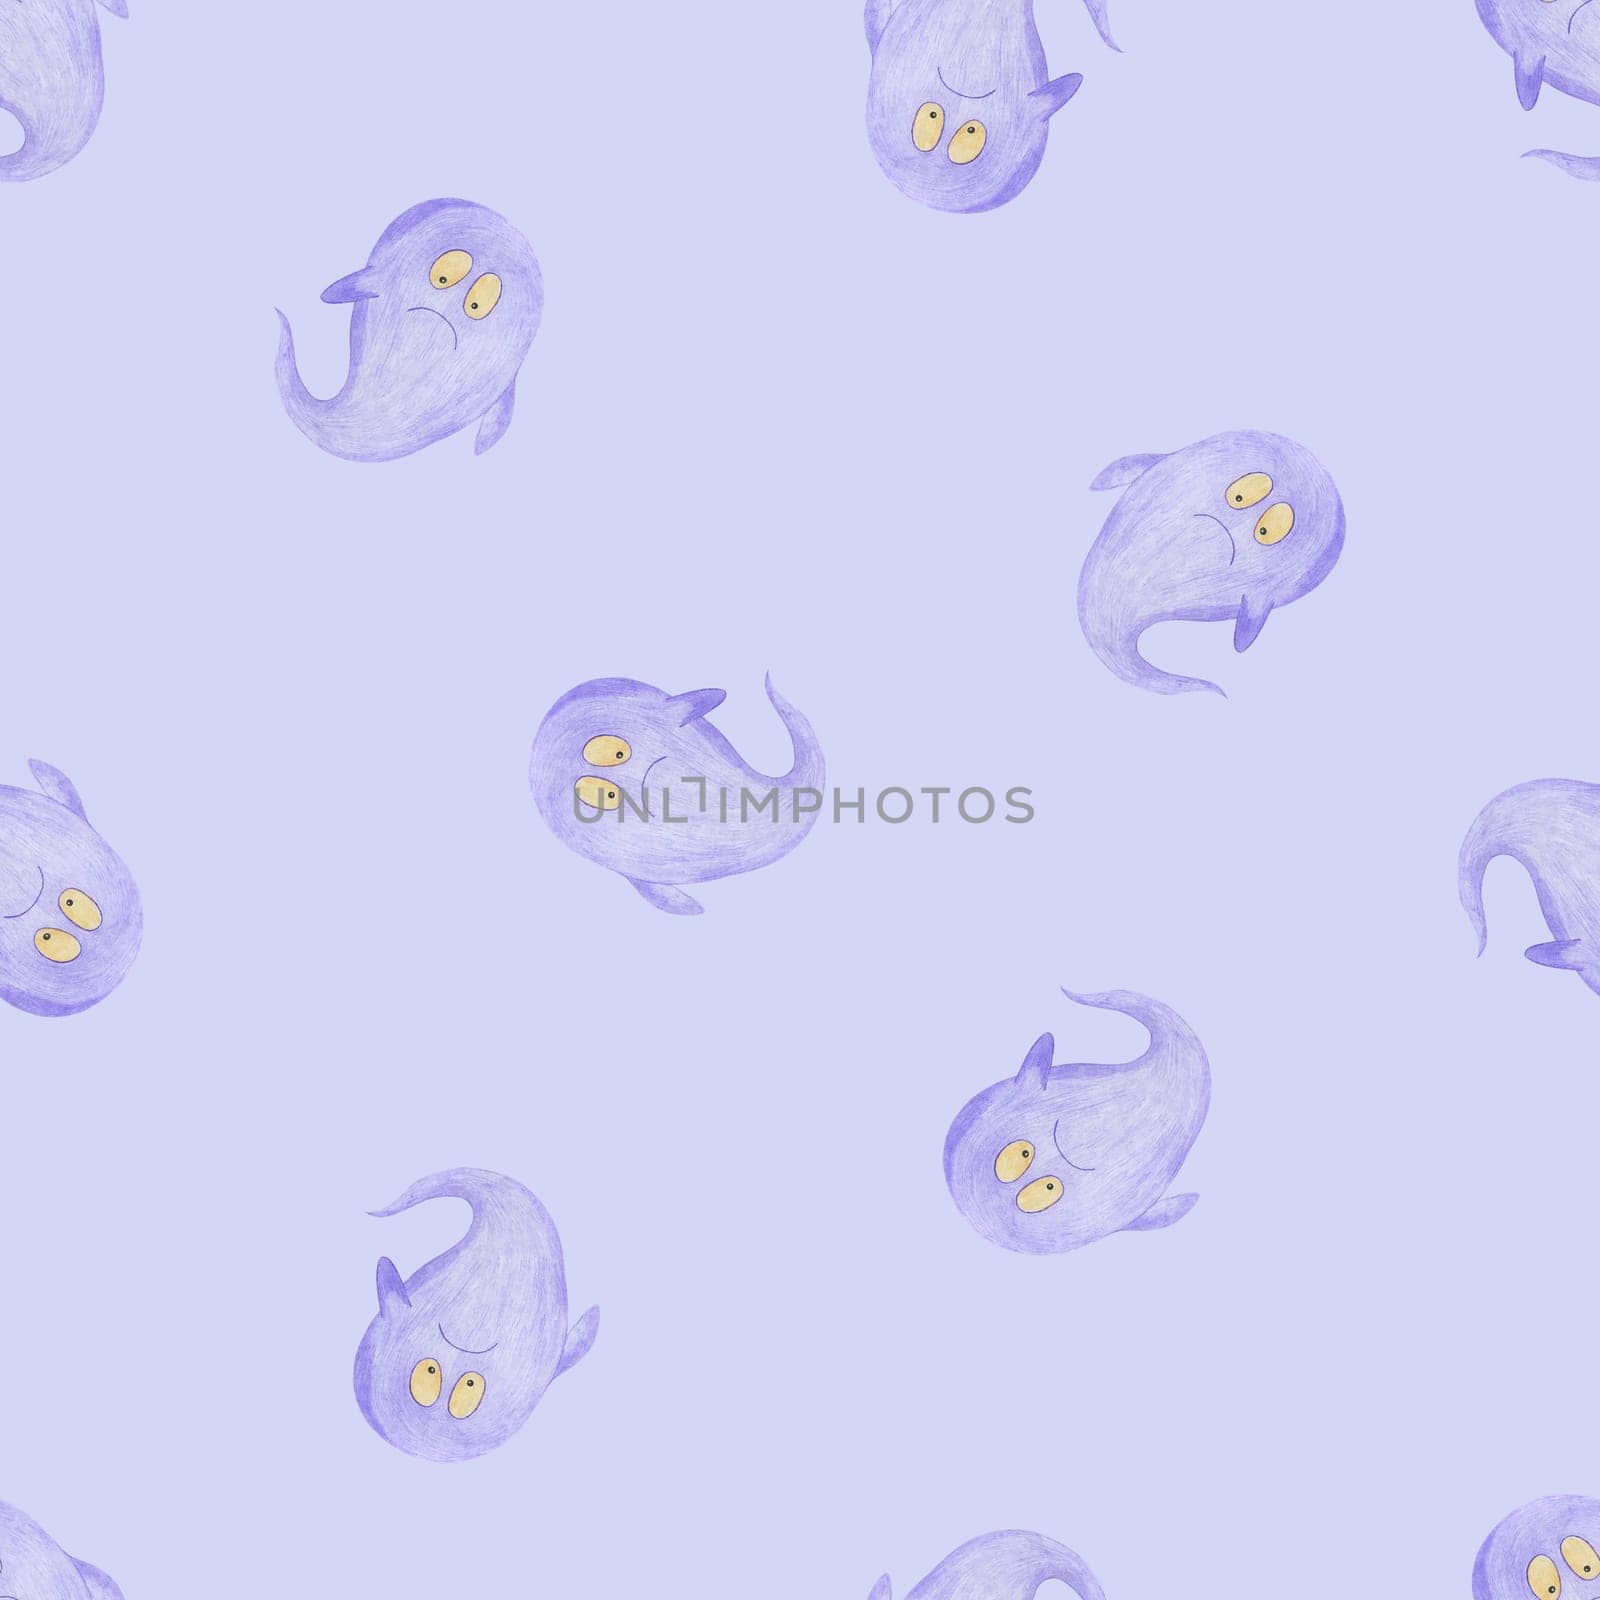 Hand Drawn Halloween Background. Halloween Seamless Pattern with Ghosts Drawn by Colored Pencils.